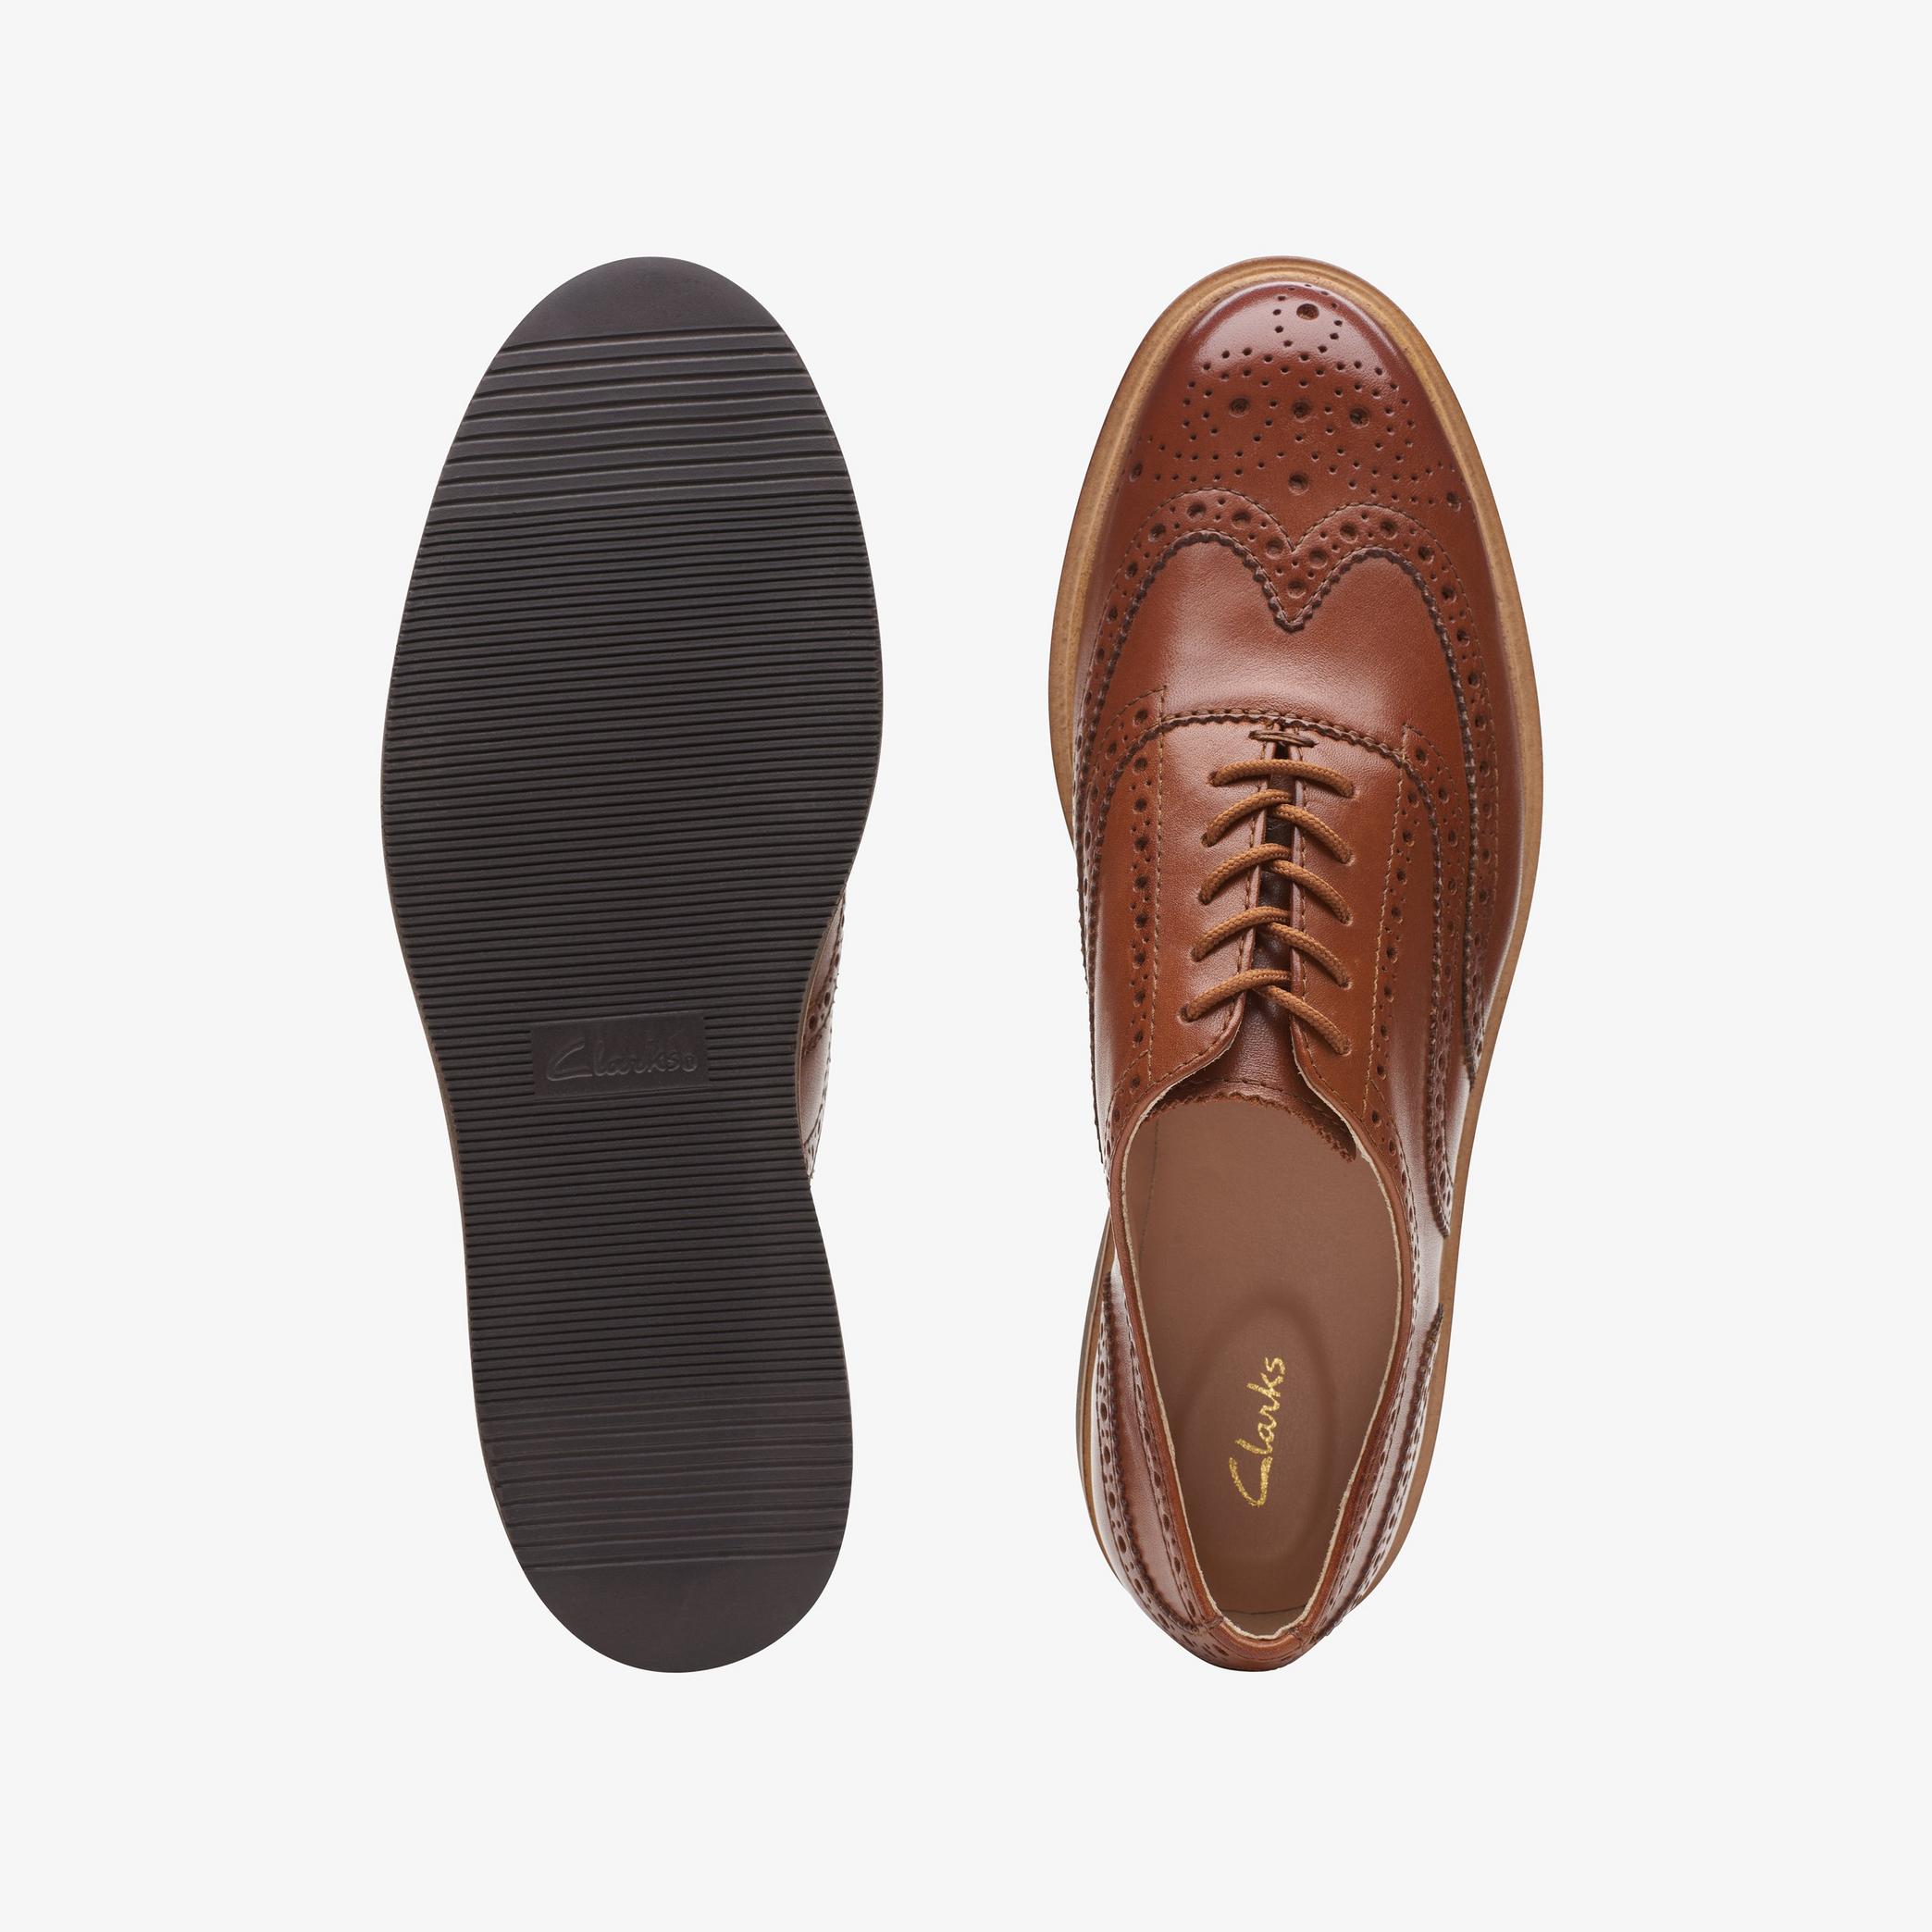 Glickly Brogue Dark Tan Leather Brogues, view 6 of 6